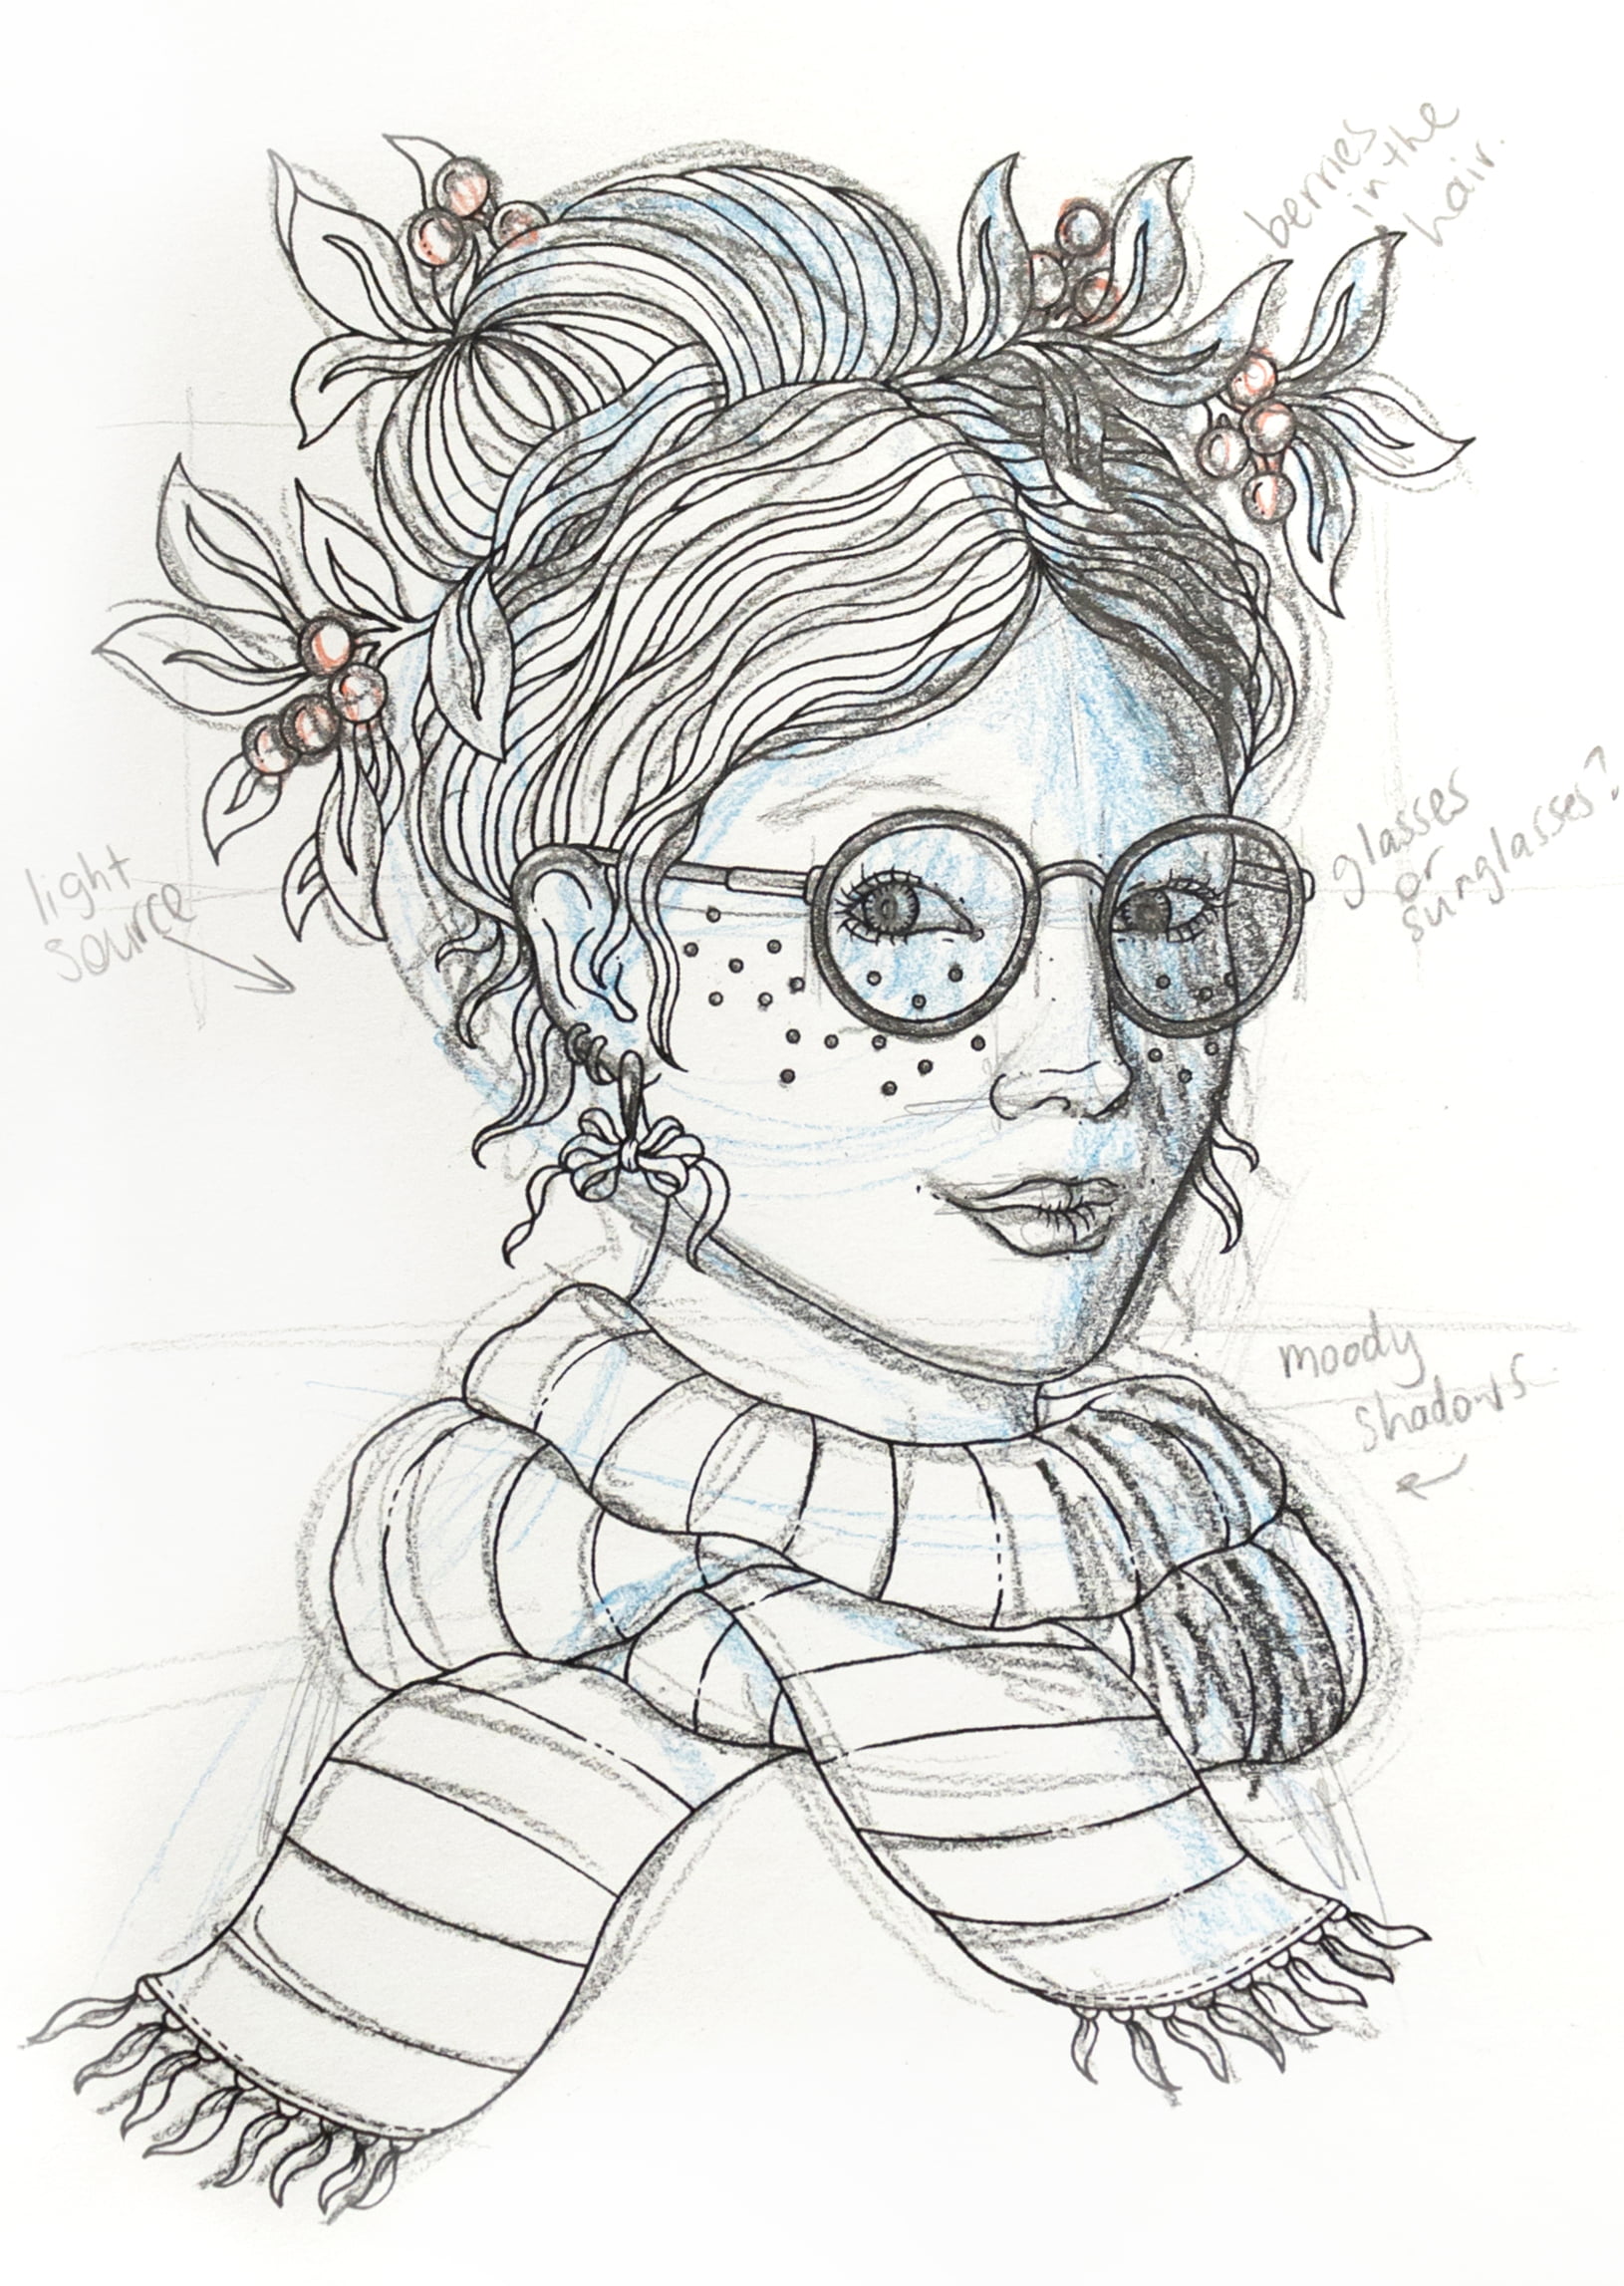 A coloring page of a girl, colored with grey lead pencil and sketch lines.